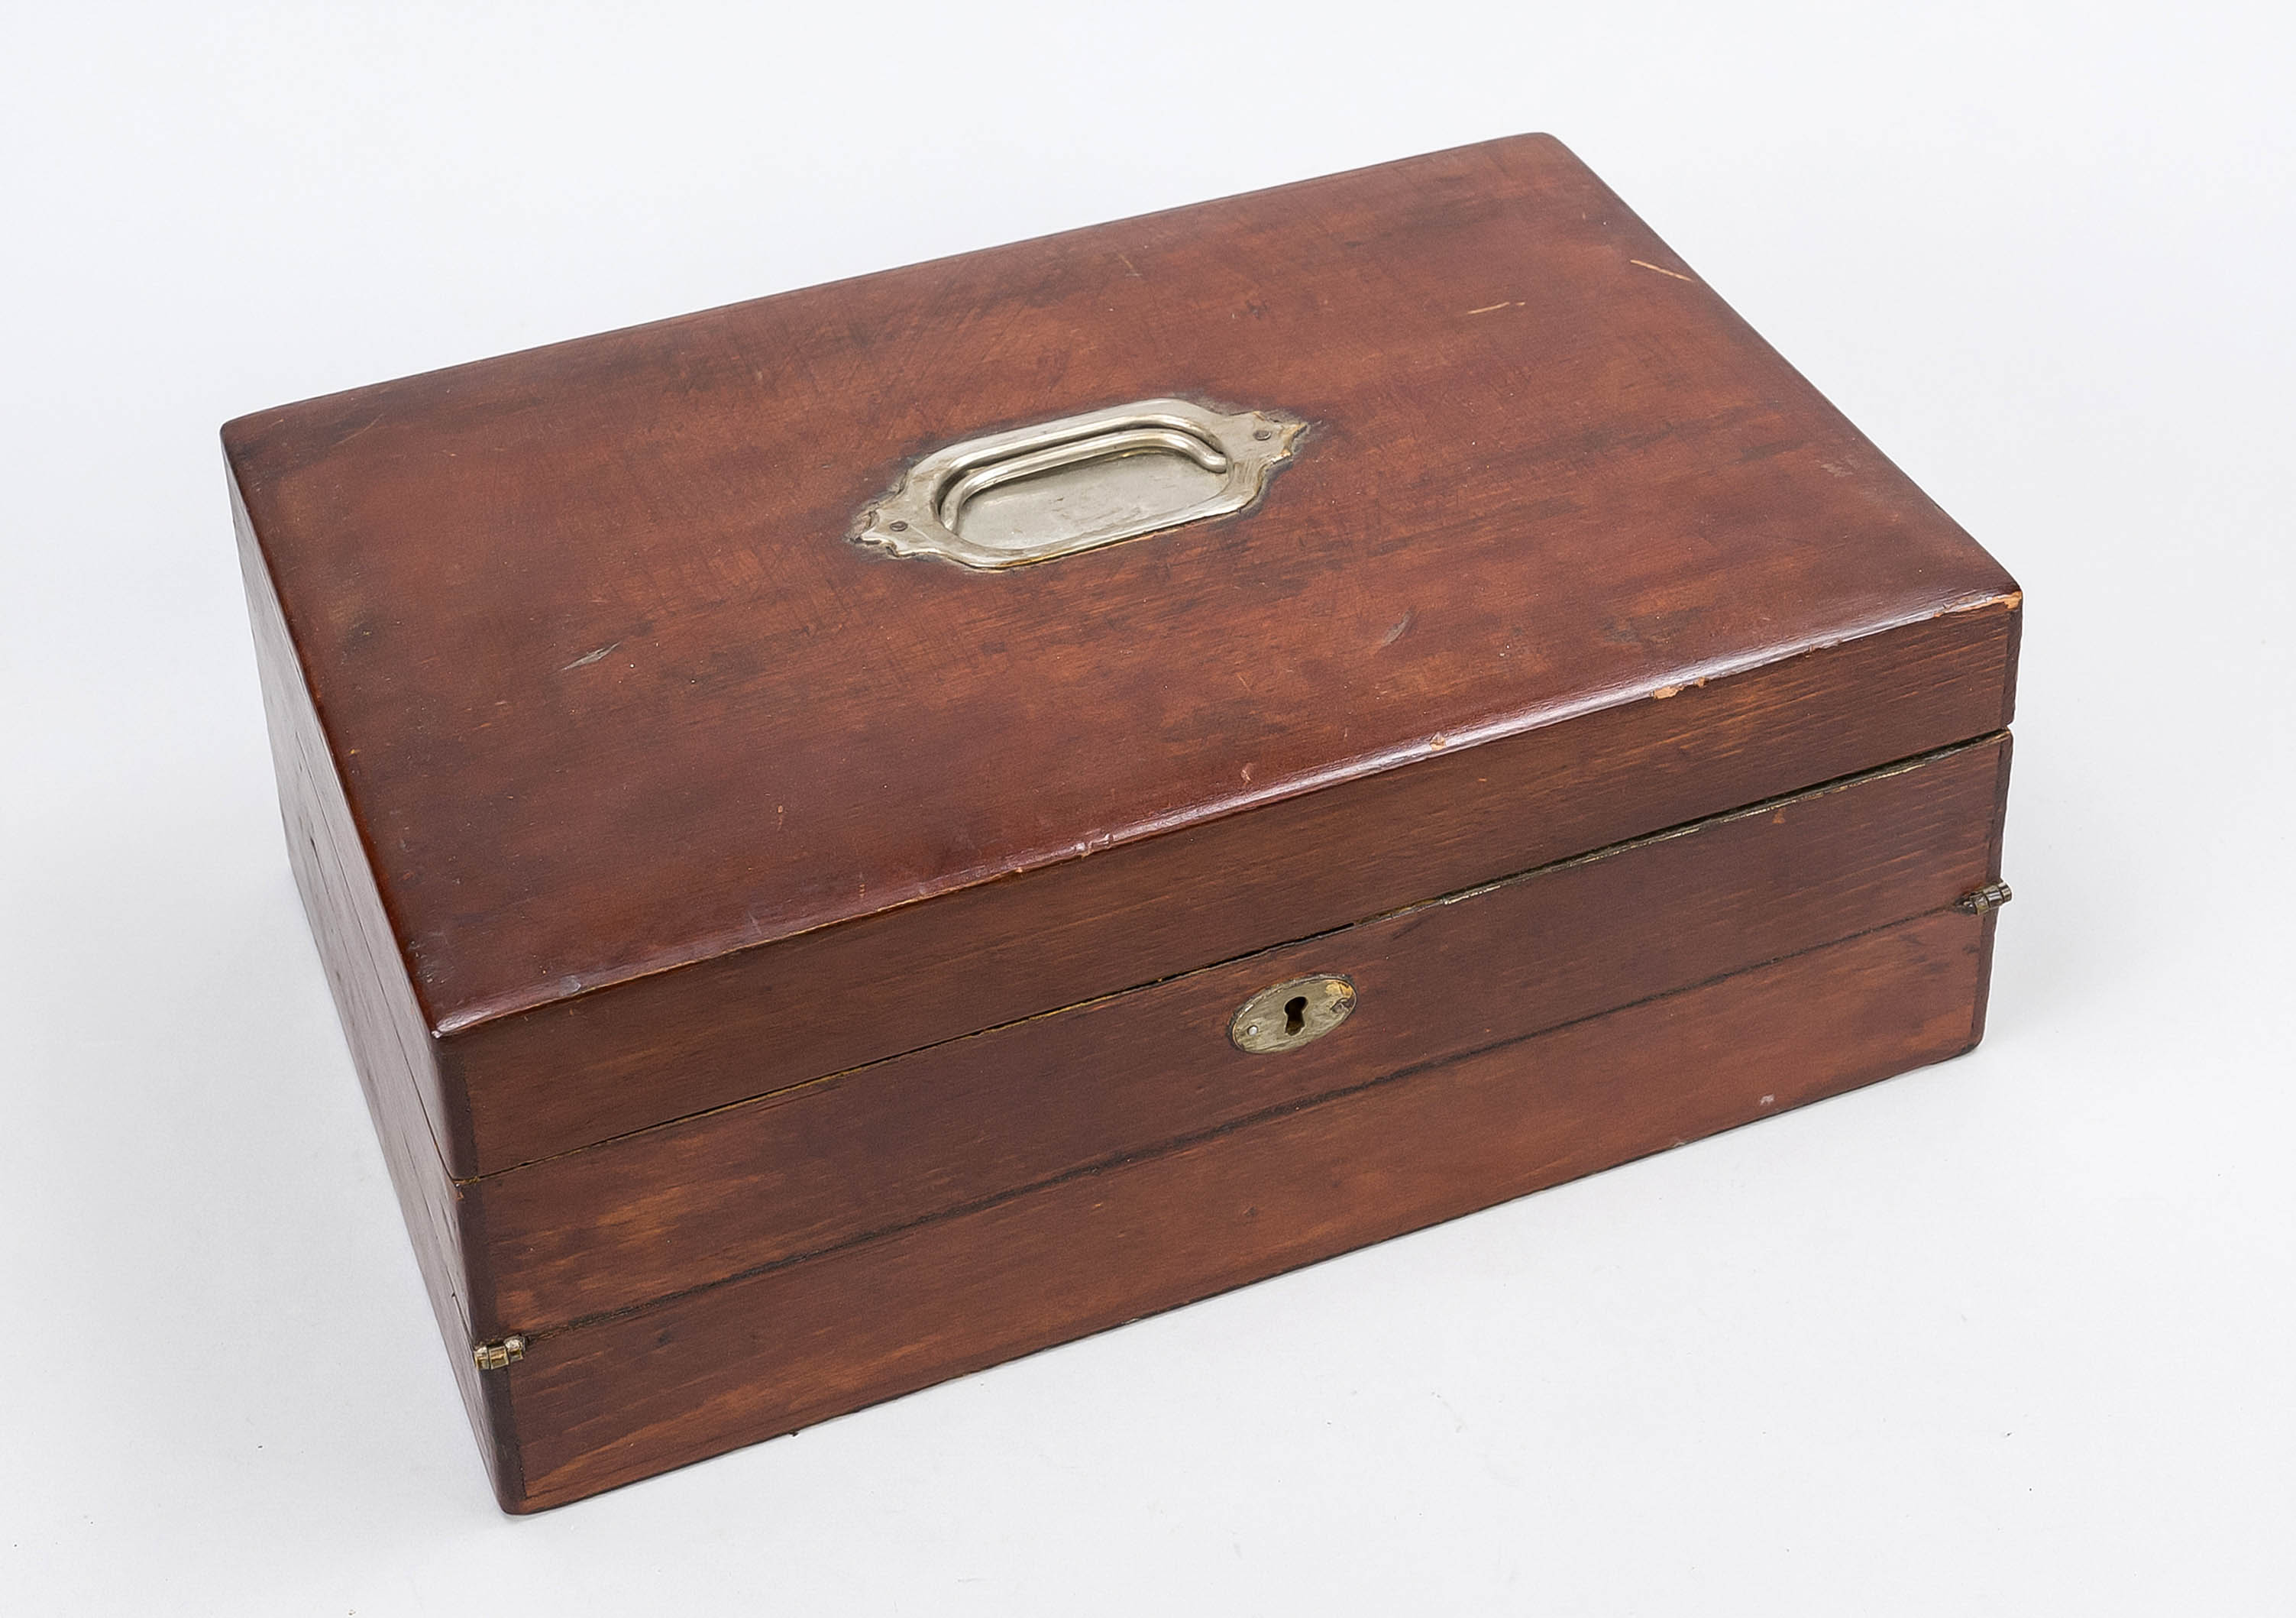 Travel writing desk, England c. 1900, probably mahogany. Hinged and with compartments for documents, - Image 2 of 2